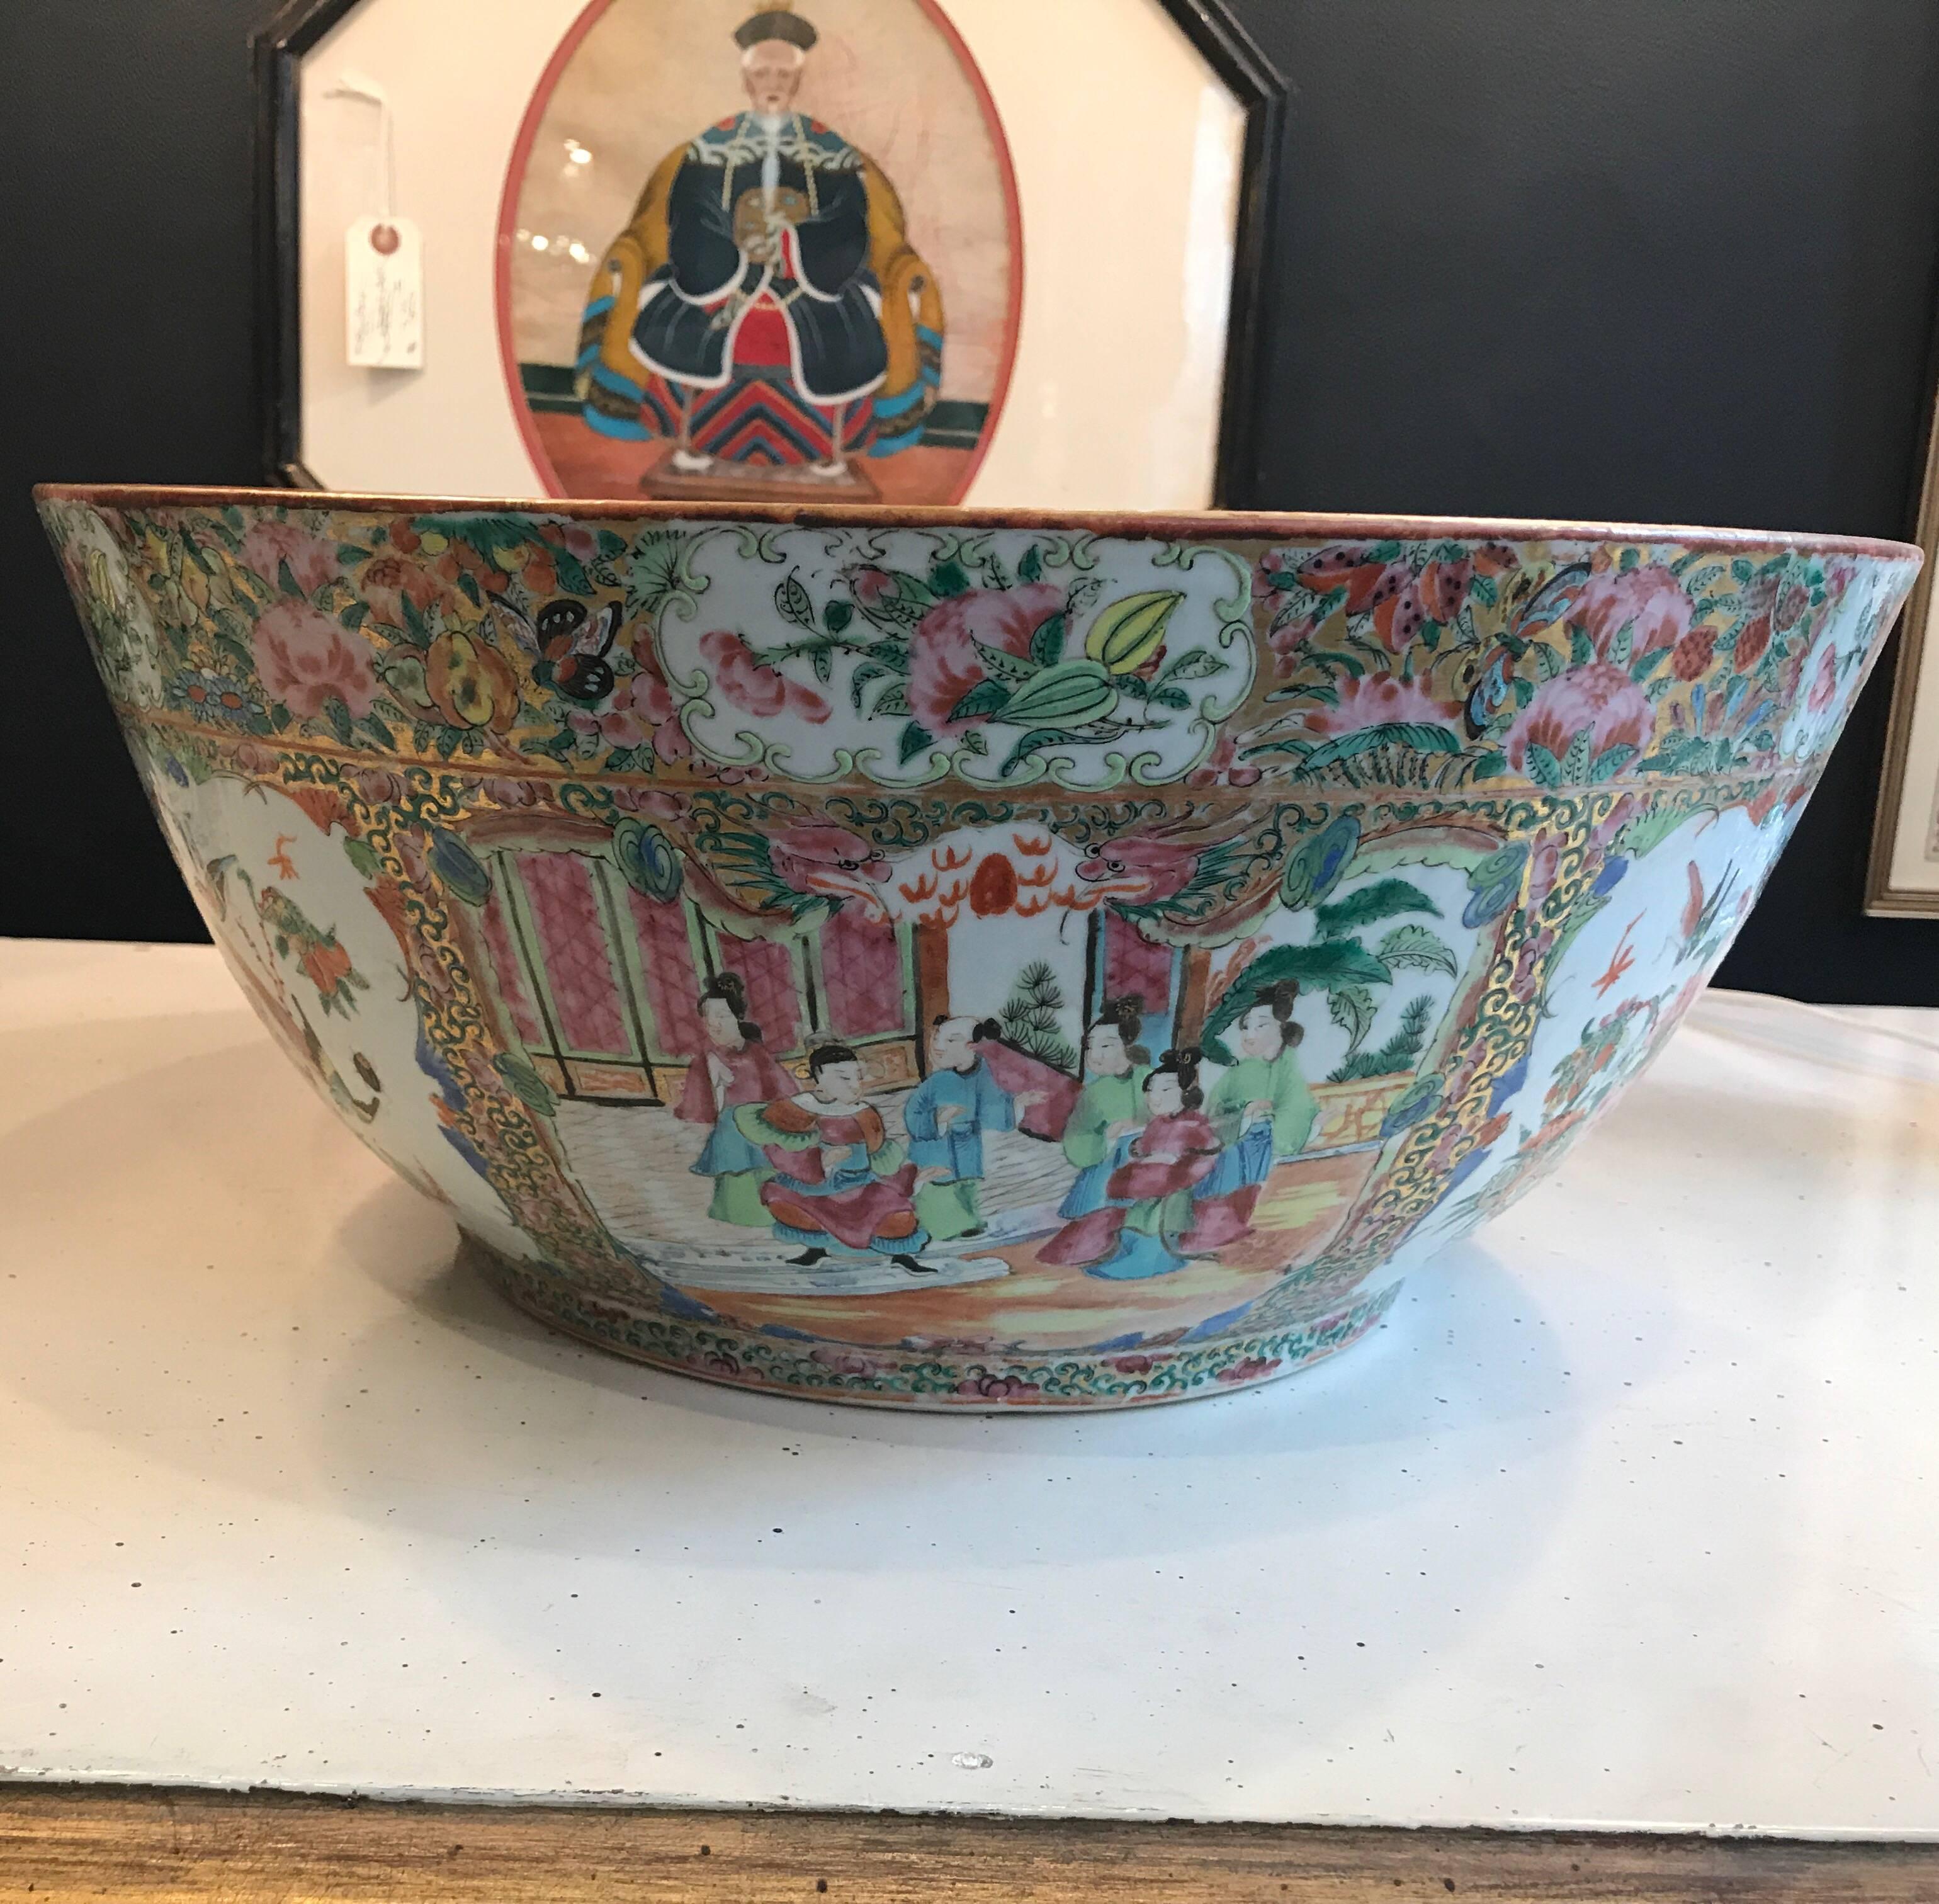 Very large Chinese porcelain rose medallion punch bowl, 19th century. Impressive size with hand painted and gilt decoration all over. A full 16 inches in diameter.